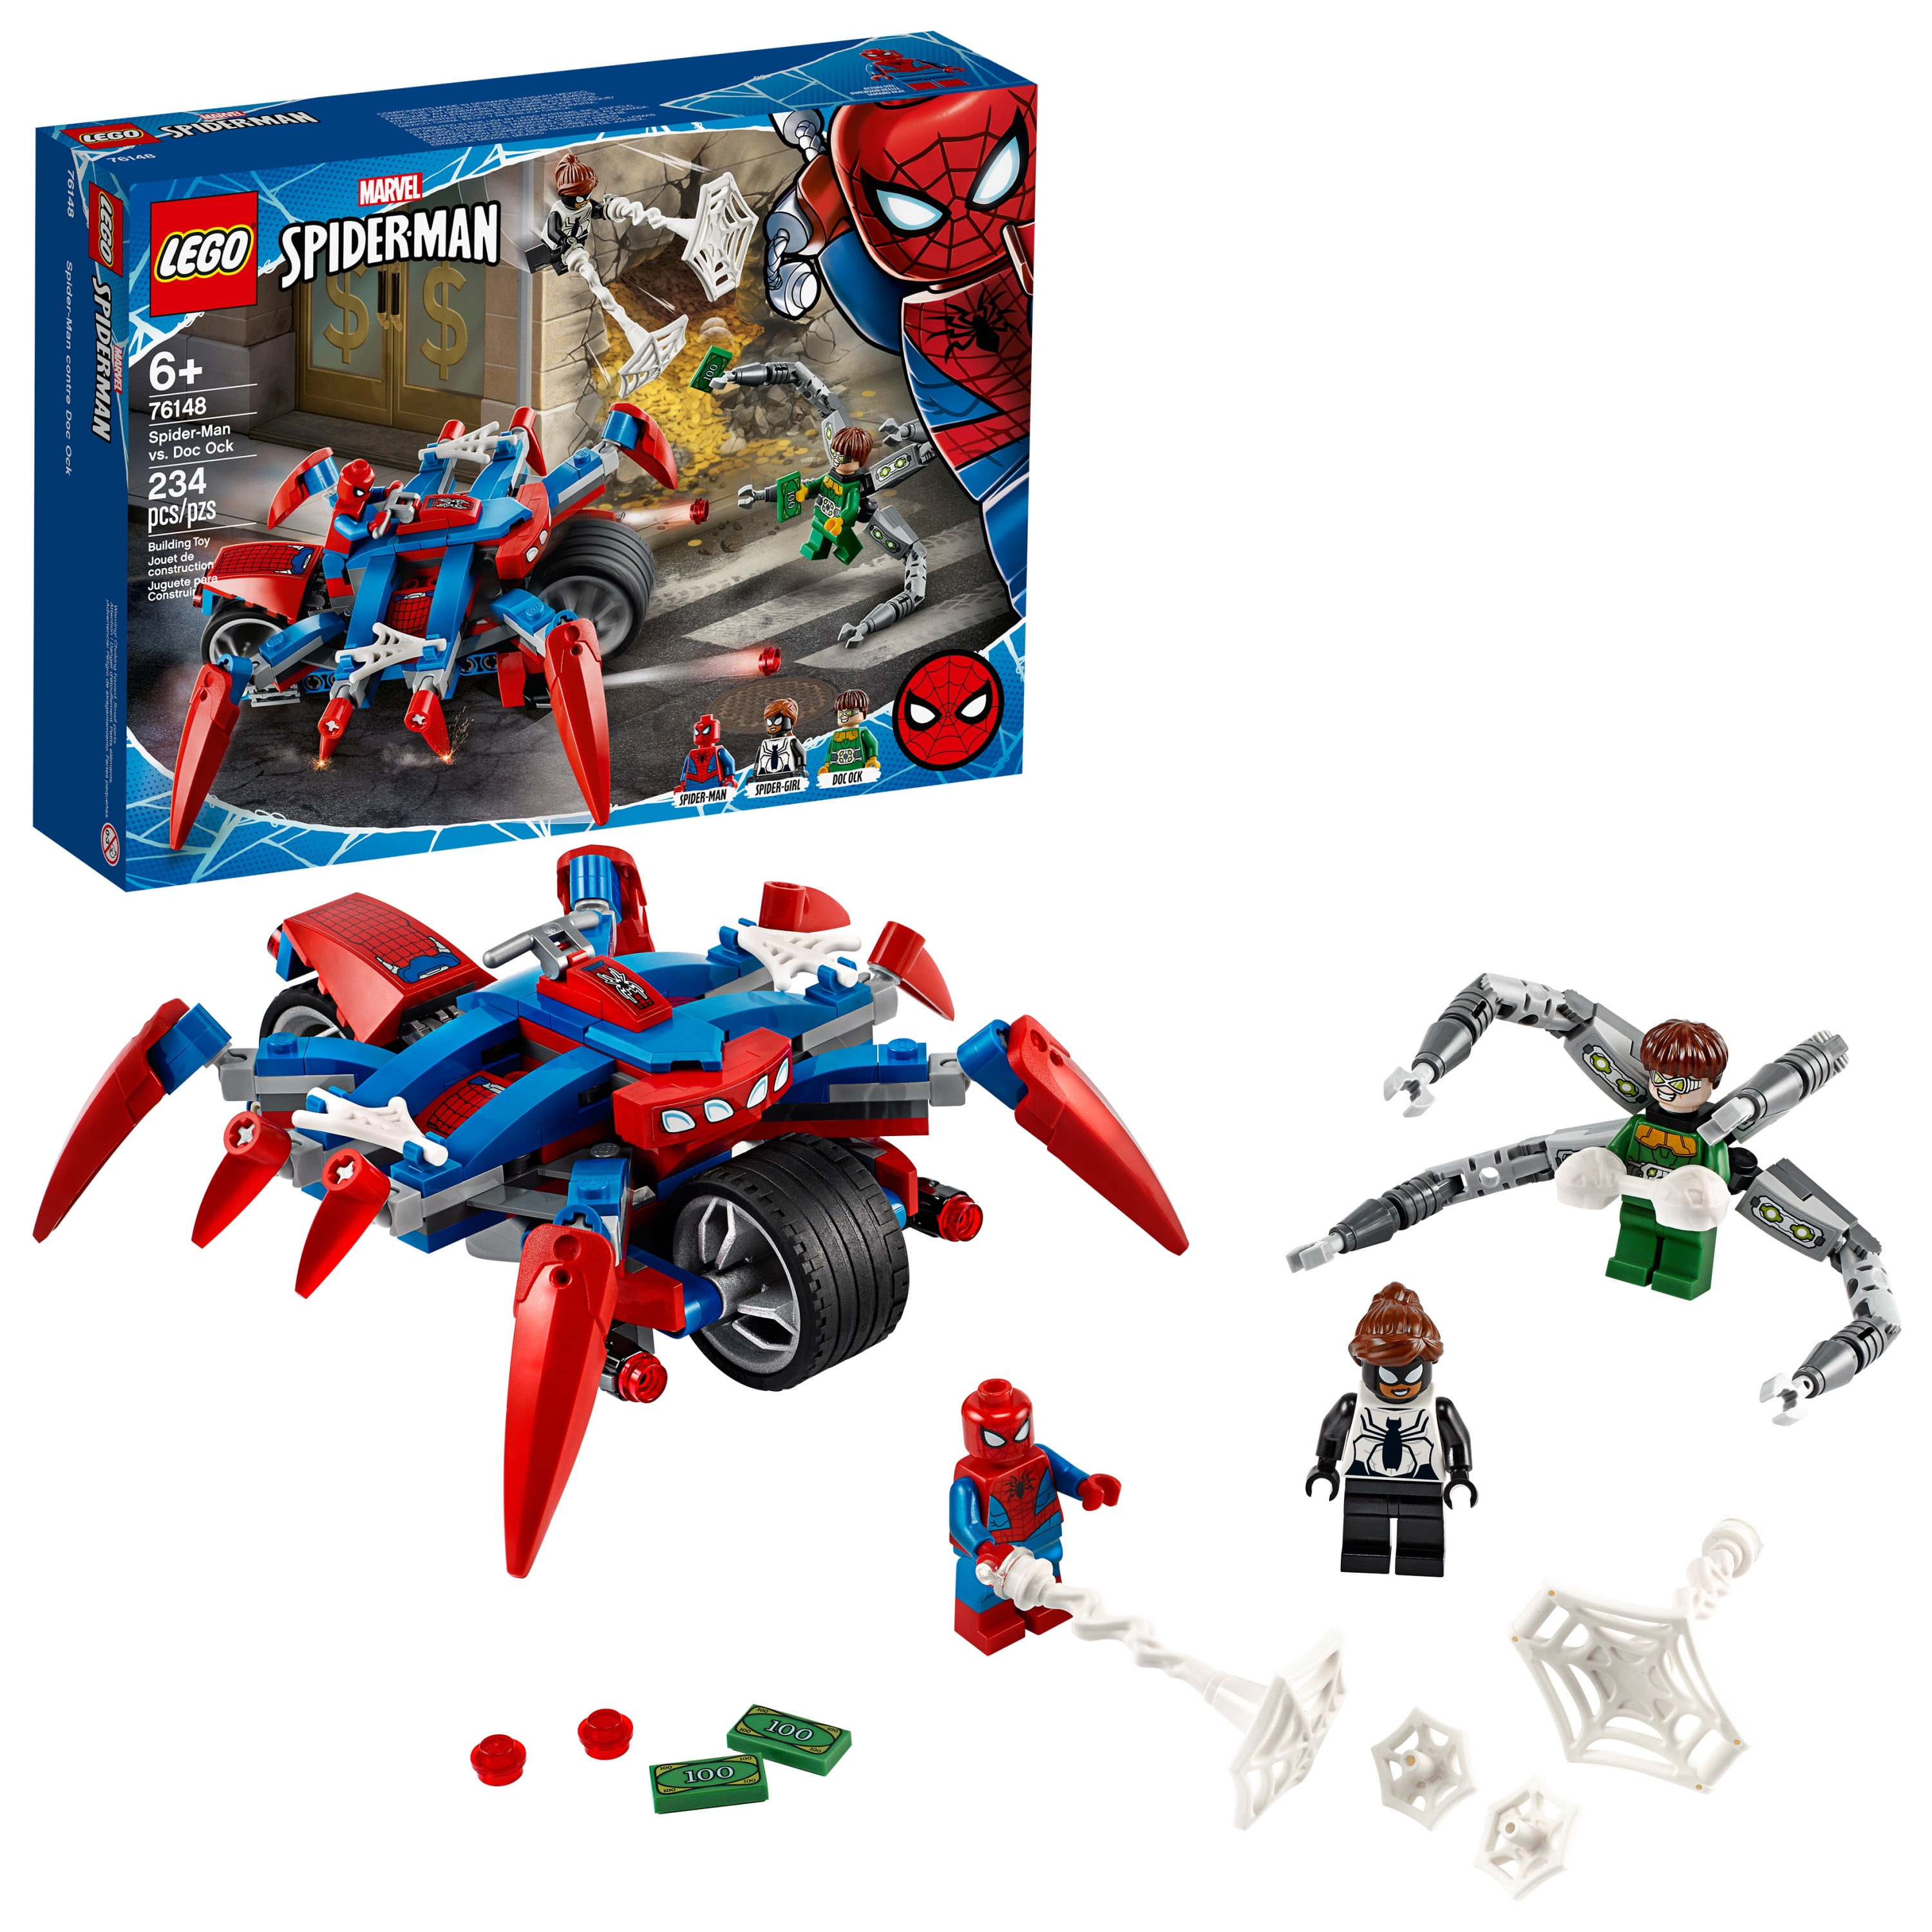 Brand New and Boxed Amazing Spiderman Motorcycle Toy 